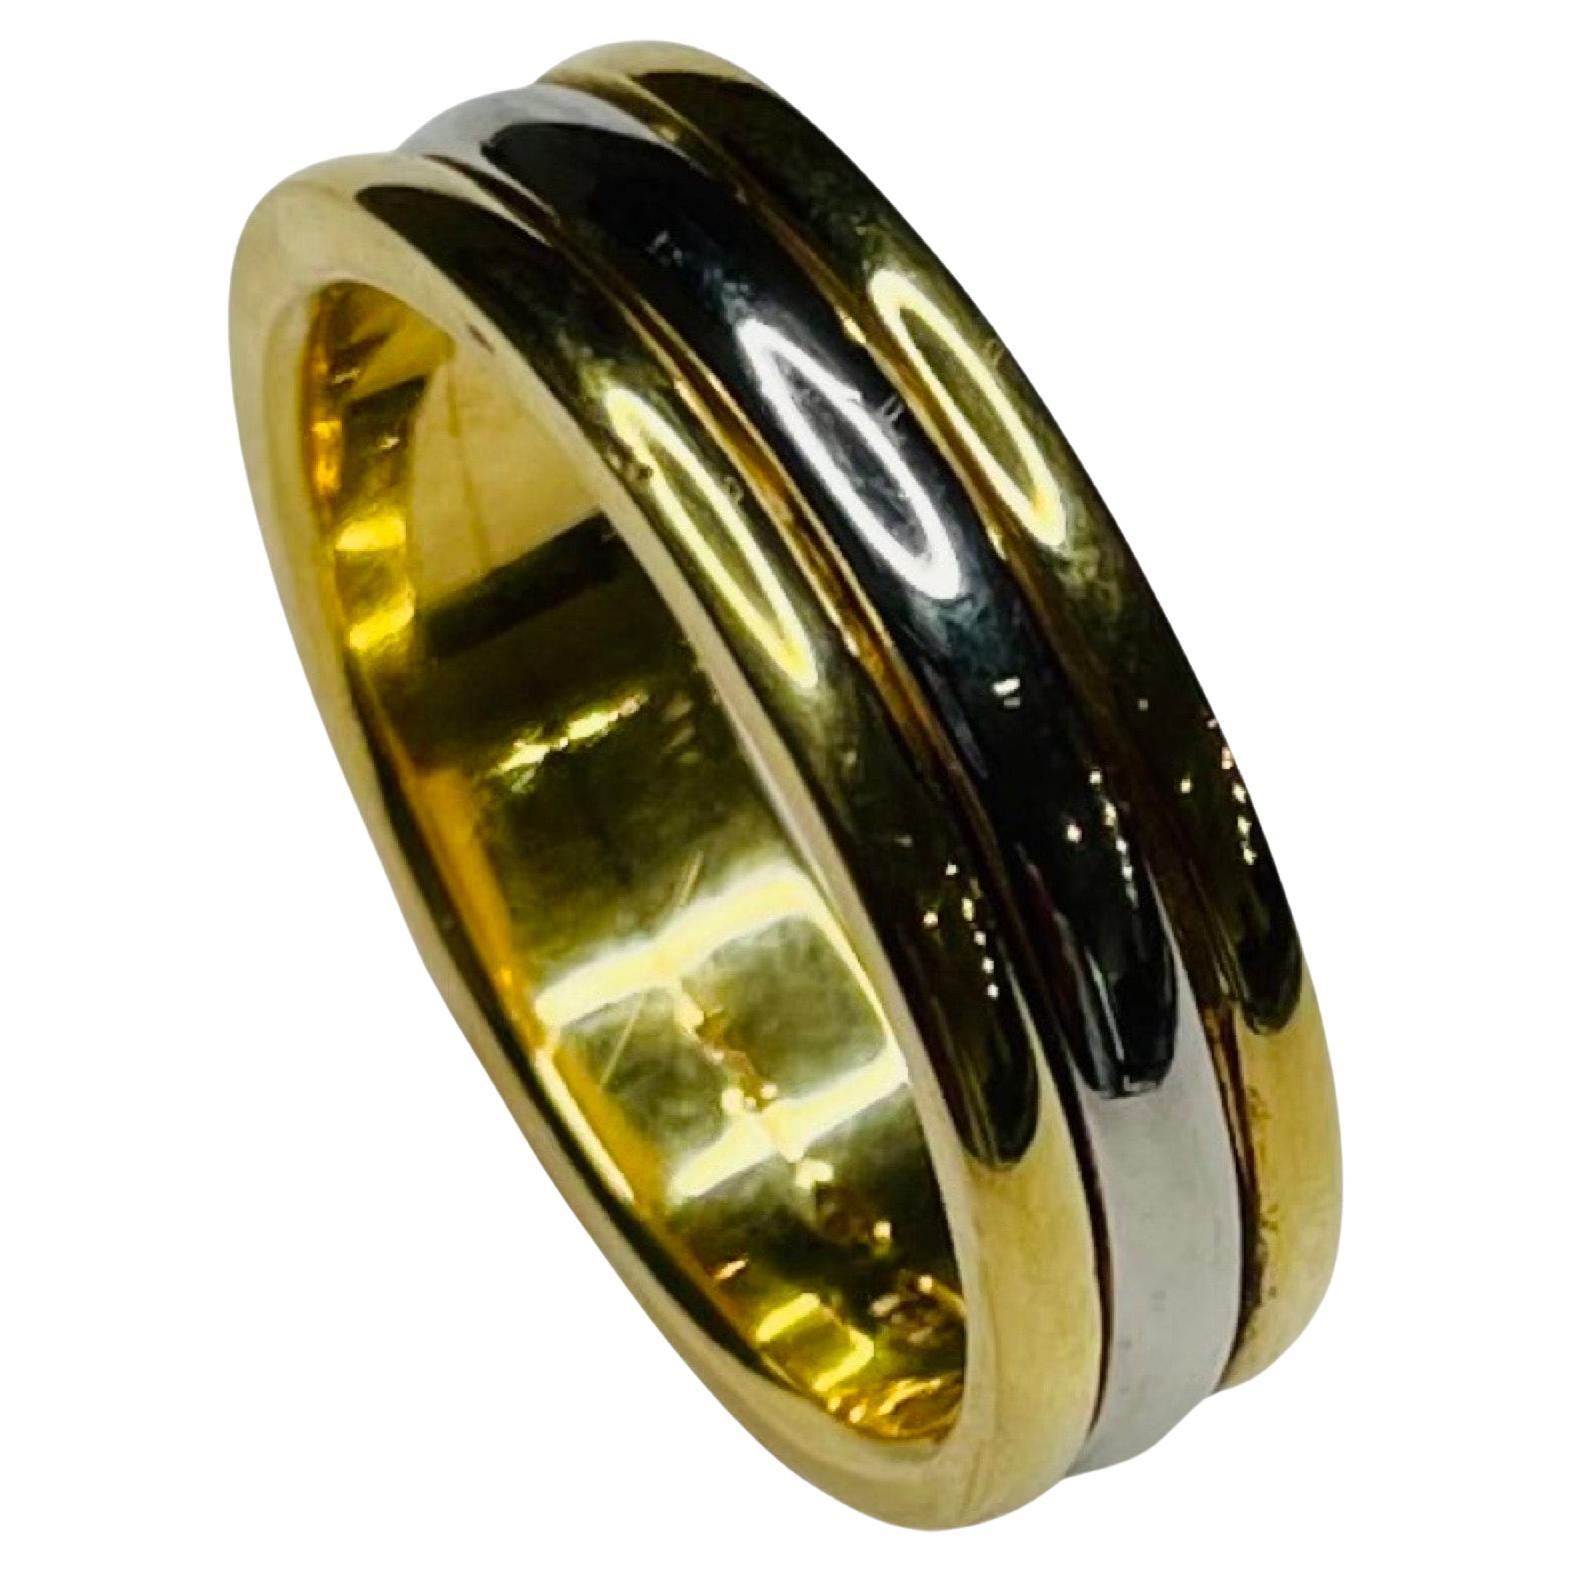 Lithos Platinum and 18K Yellow Gold Comfort Fit Wedding Band